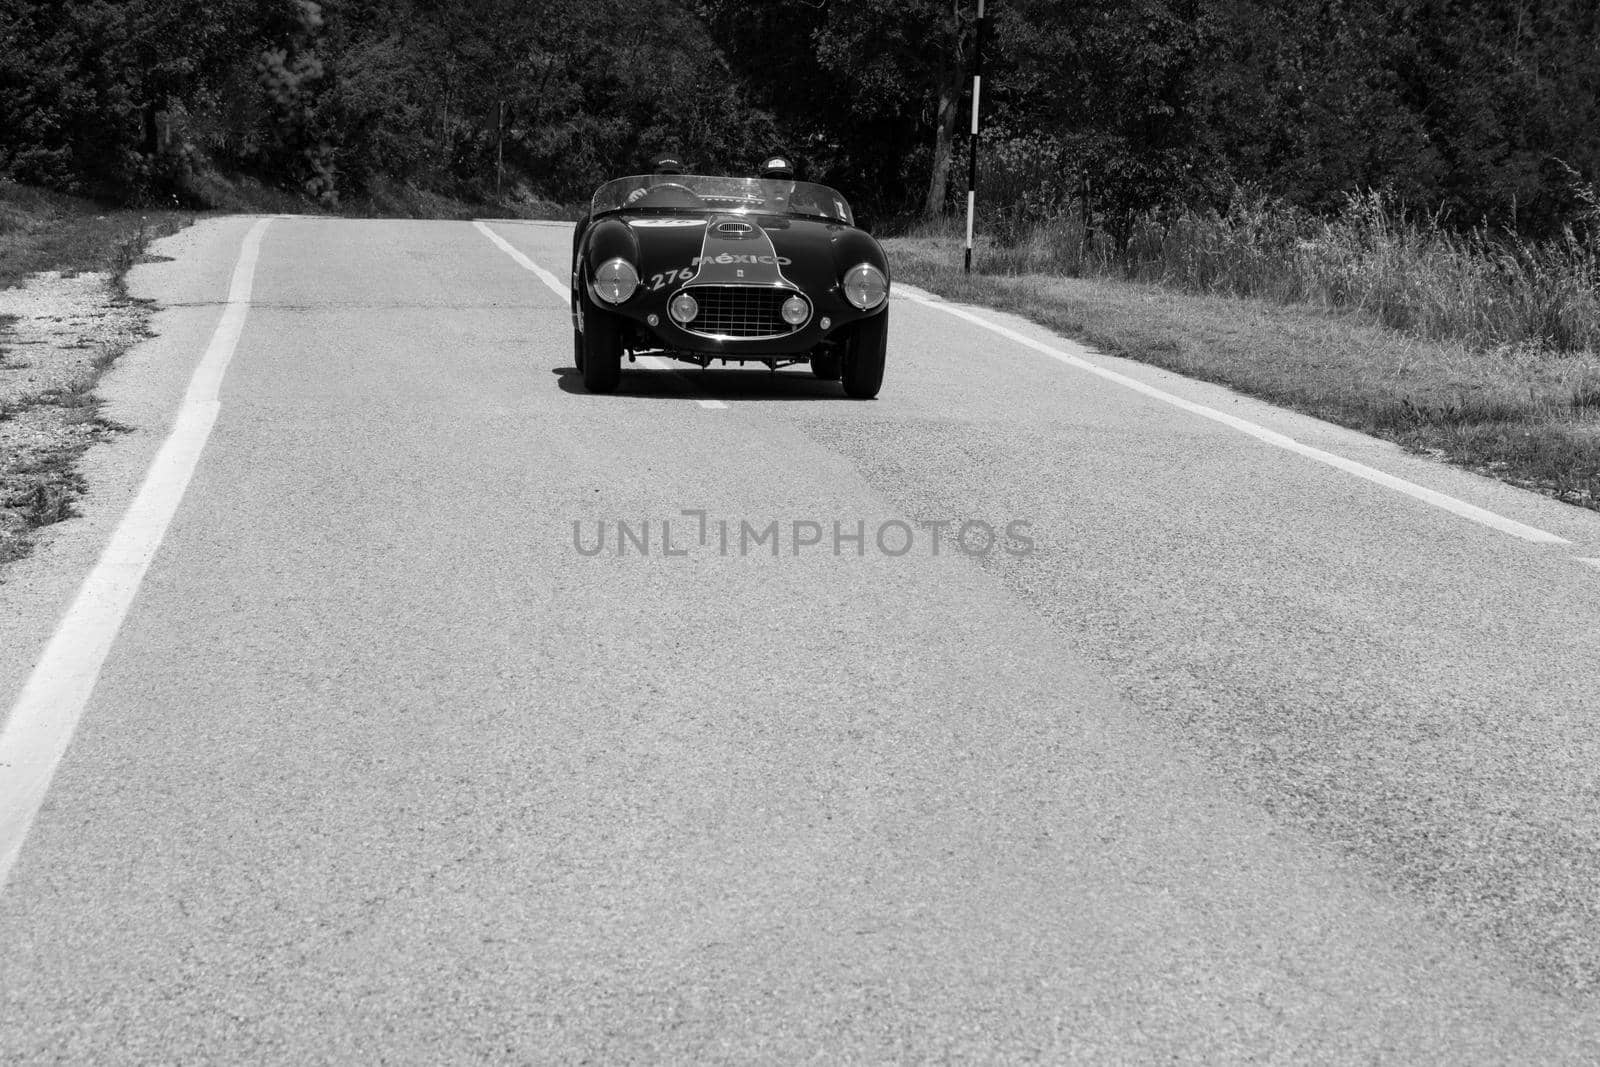 FERRARI 166 MM SPIDER VIGNALE 1953 on an old racing car in rally Mille Miglia 2022 the famous italian historical race (1927-1957 by massimocampanari